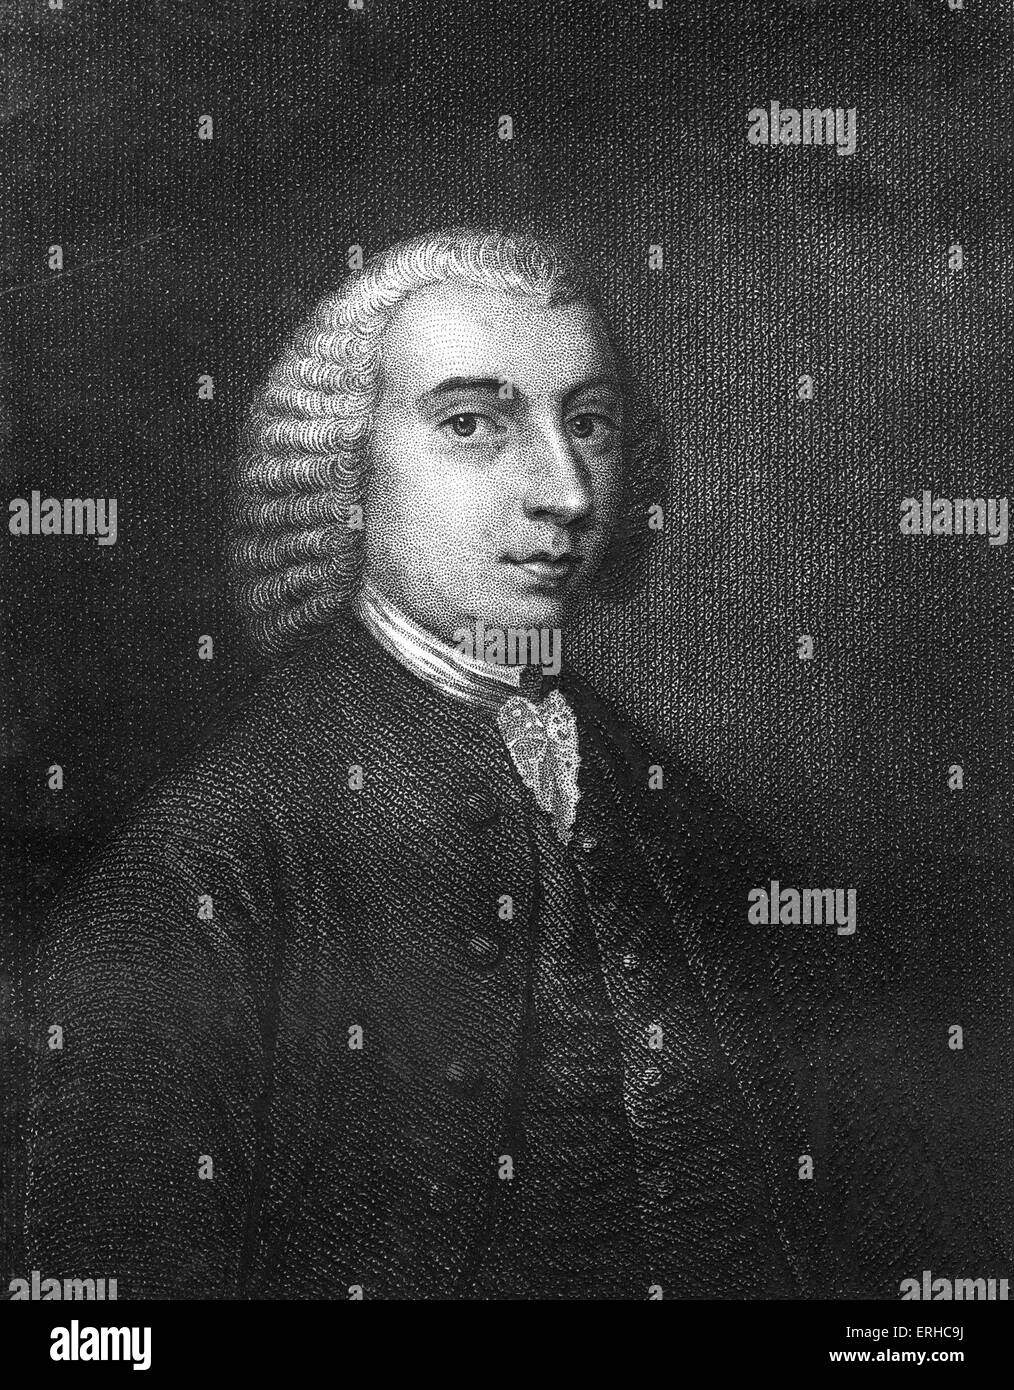 Tobias Smollett, portrait. Scottish poet and author, 19 March 1721 – 17 September 1771. After the engraving by E.Scriven. Stock Photo